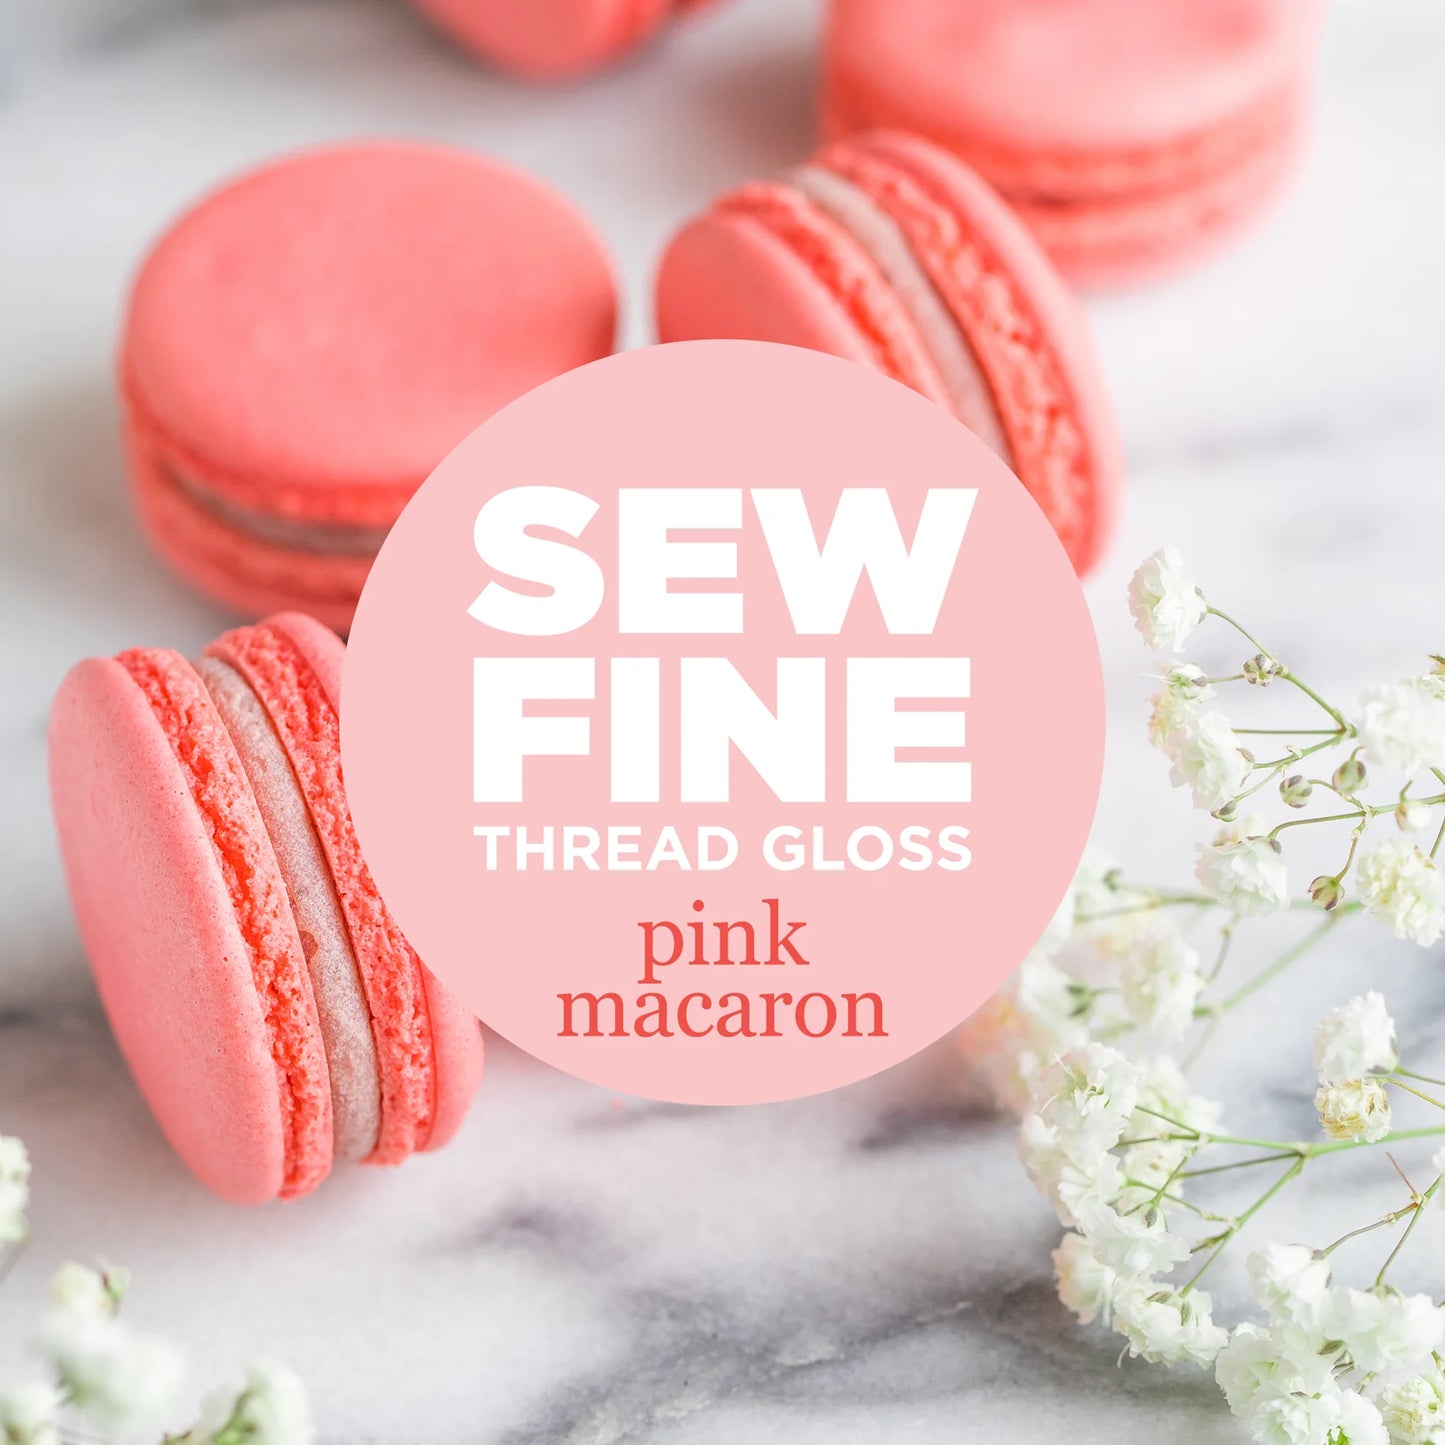 0.5oz pot of "Pink Macaron" Sew Fine Thread Gloss. A light and fluffy treat of fresh fruit, vanilla and tonka bean spice.  No more tangled, knotted or static-y threads while you're hand-sewing!